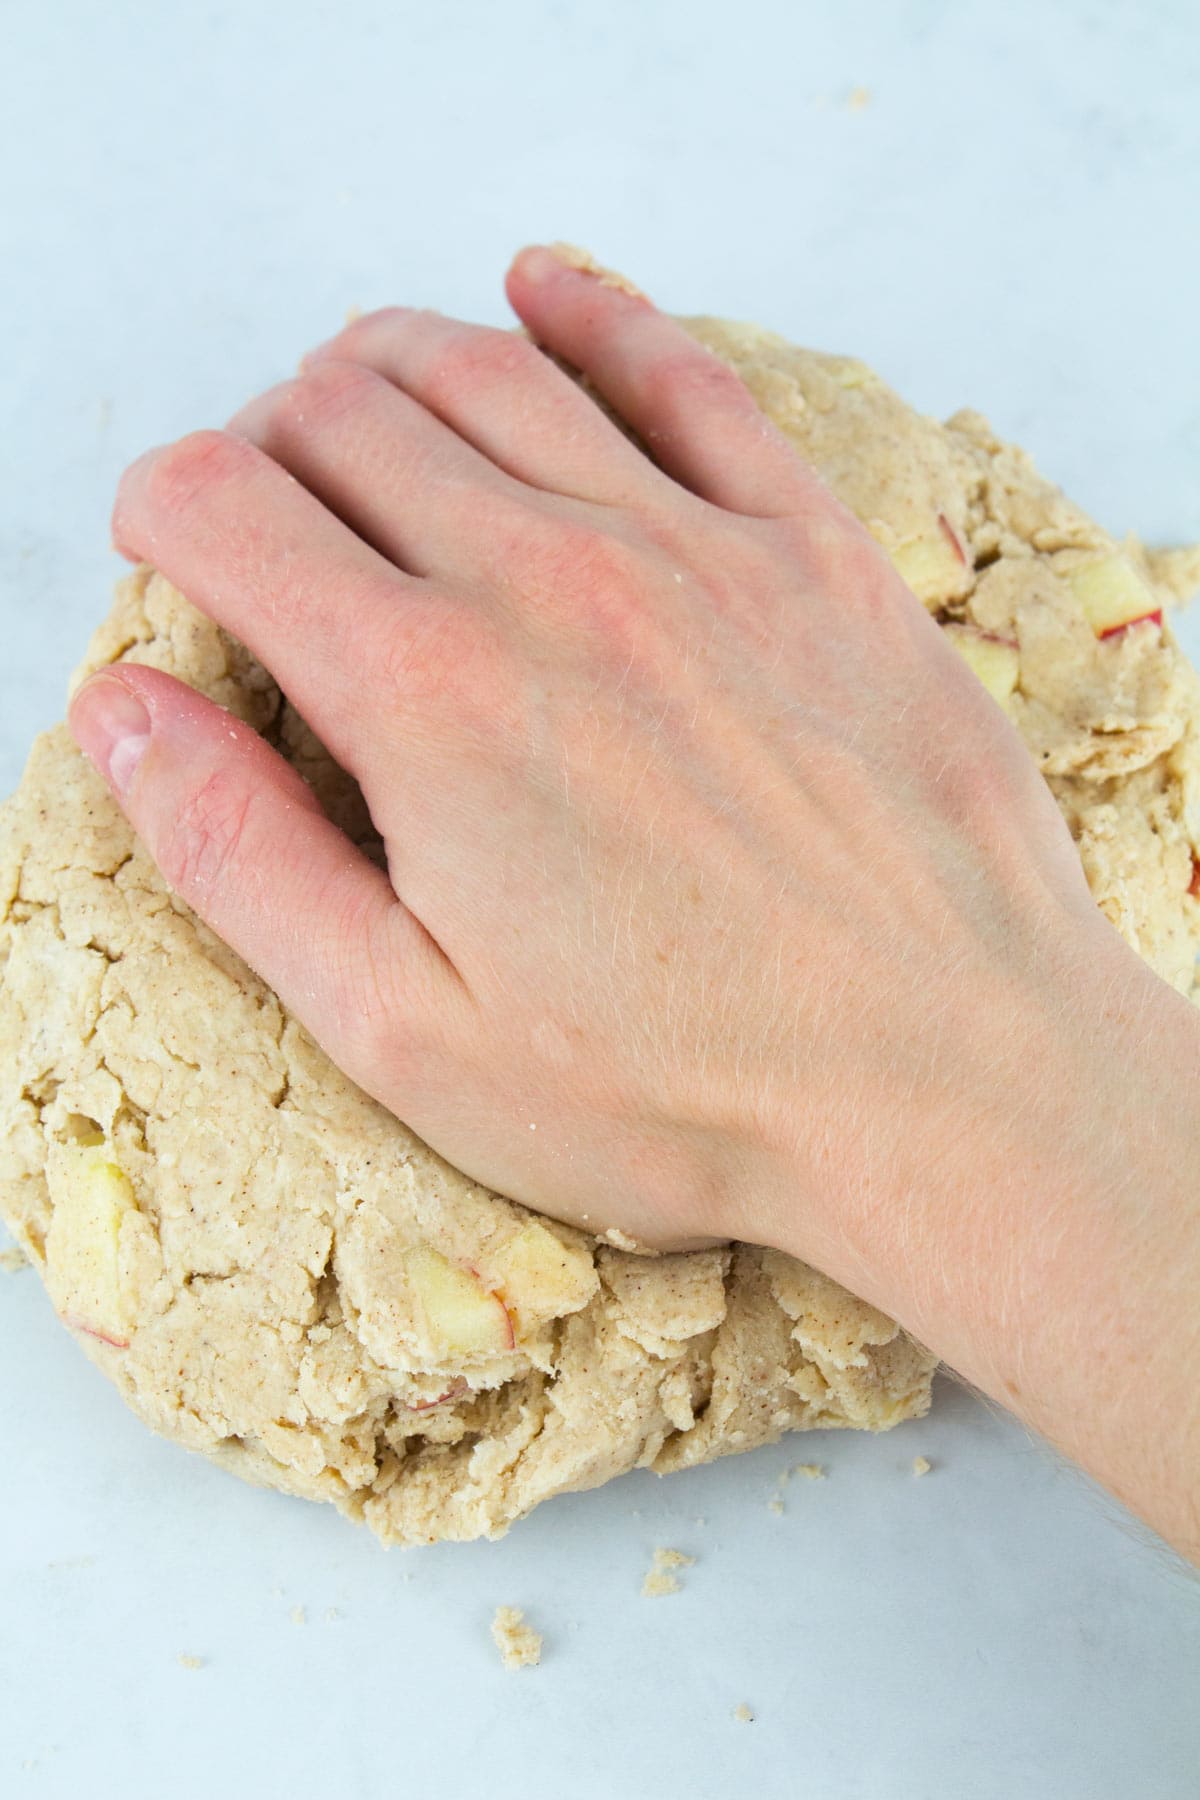 Hand kneading the apple scone dough on a white counter.